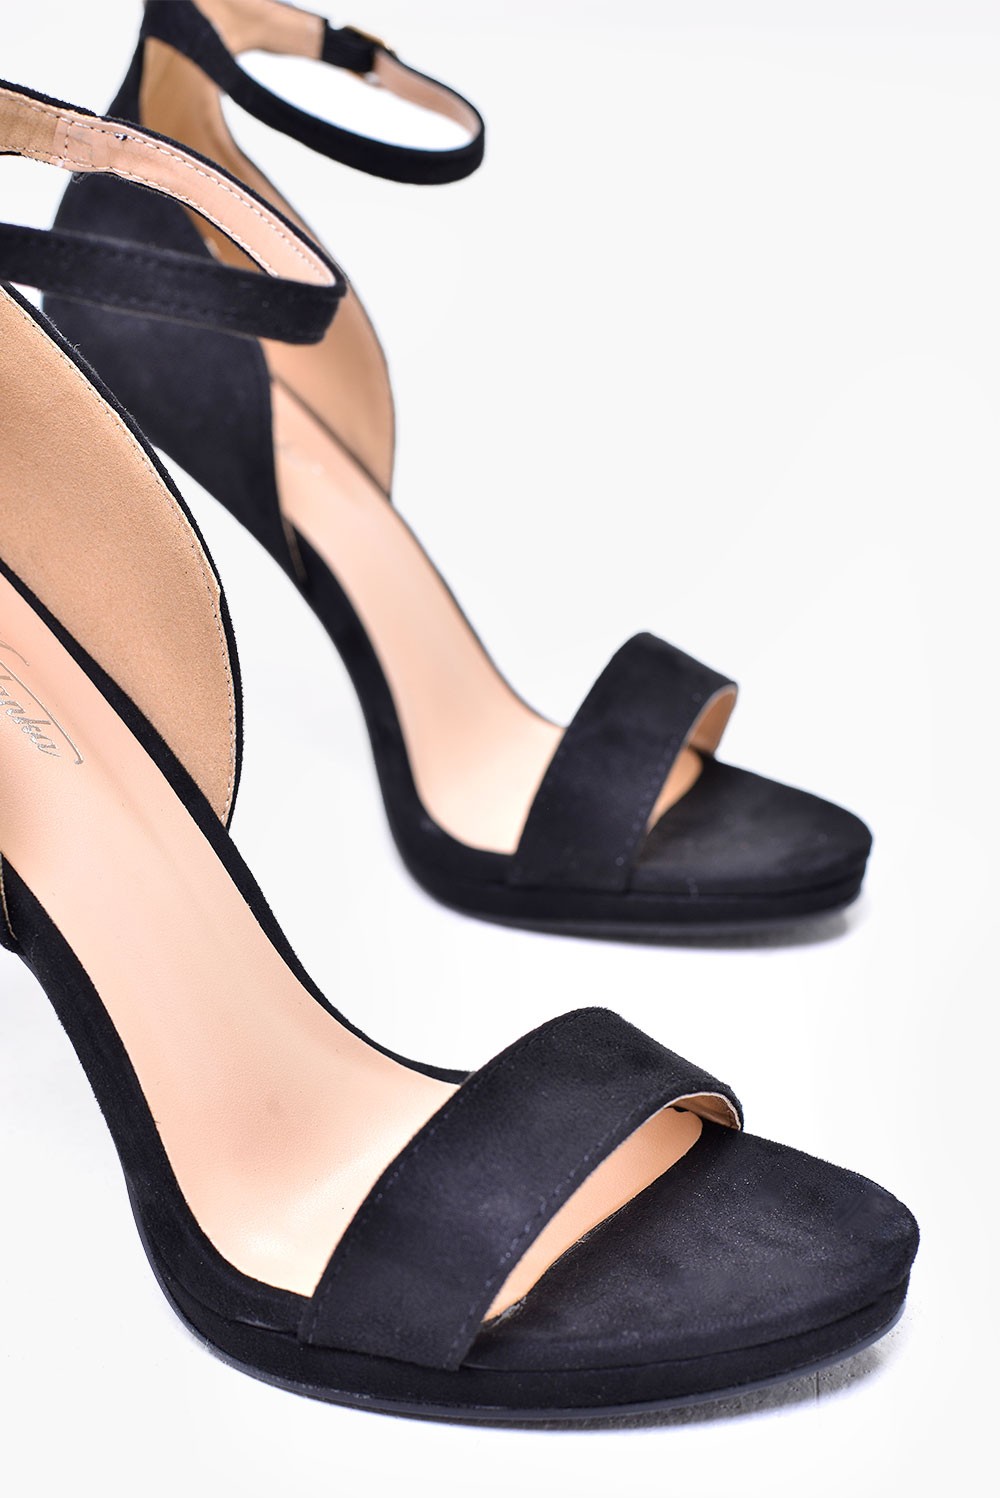 No Doubt Nelly Ankle Strap Platform Sandals in Black | iCLOTHING